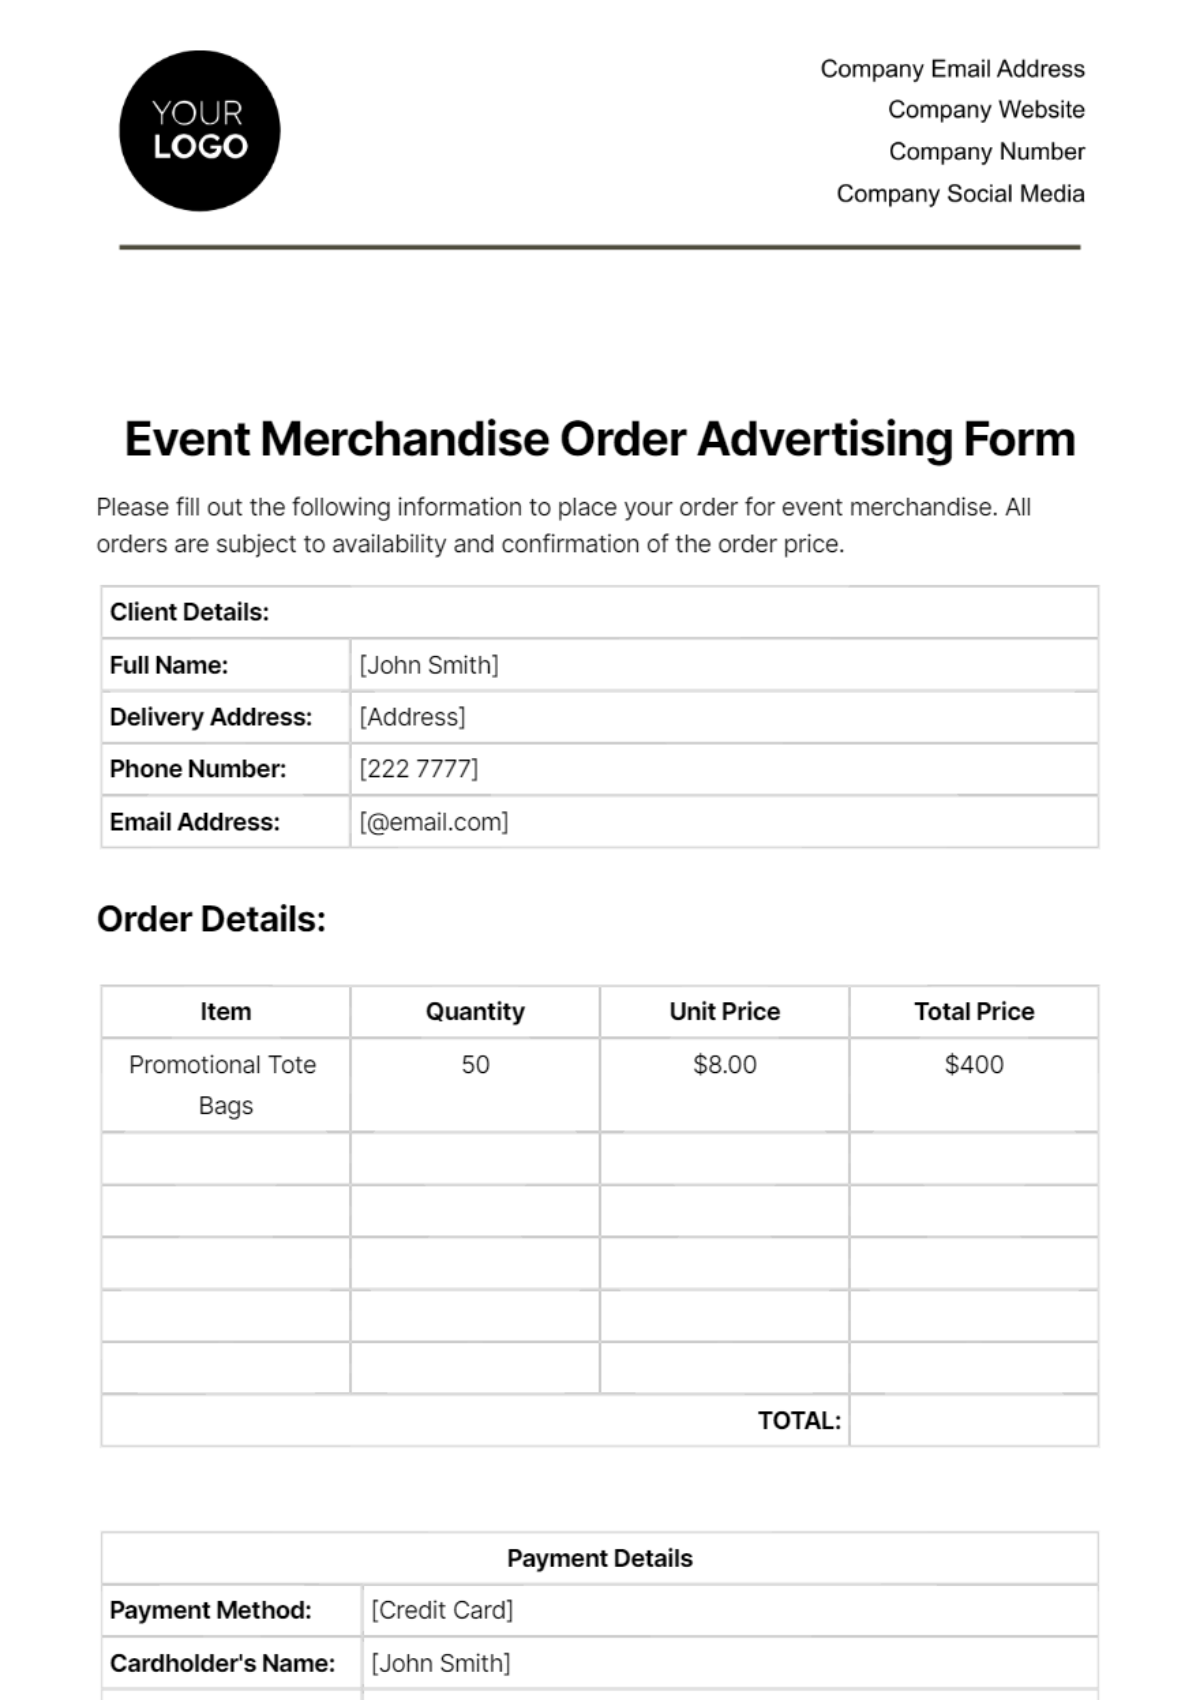 Event Merchandise Order Advertising Form Template